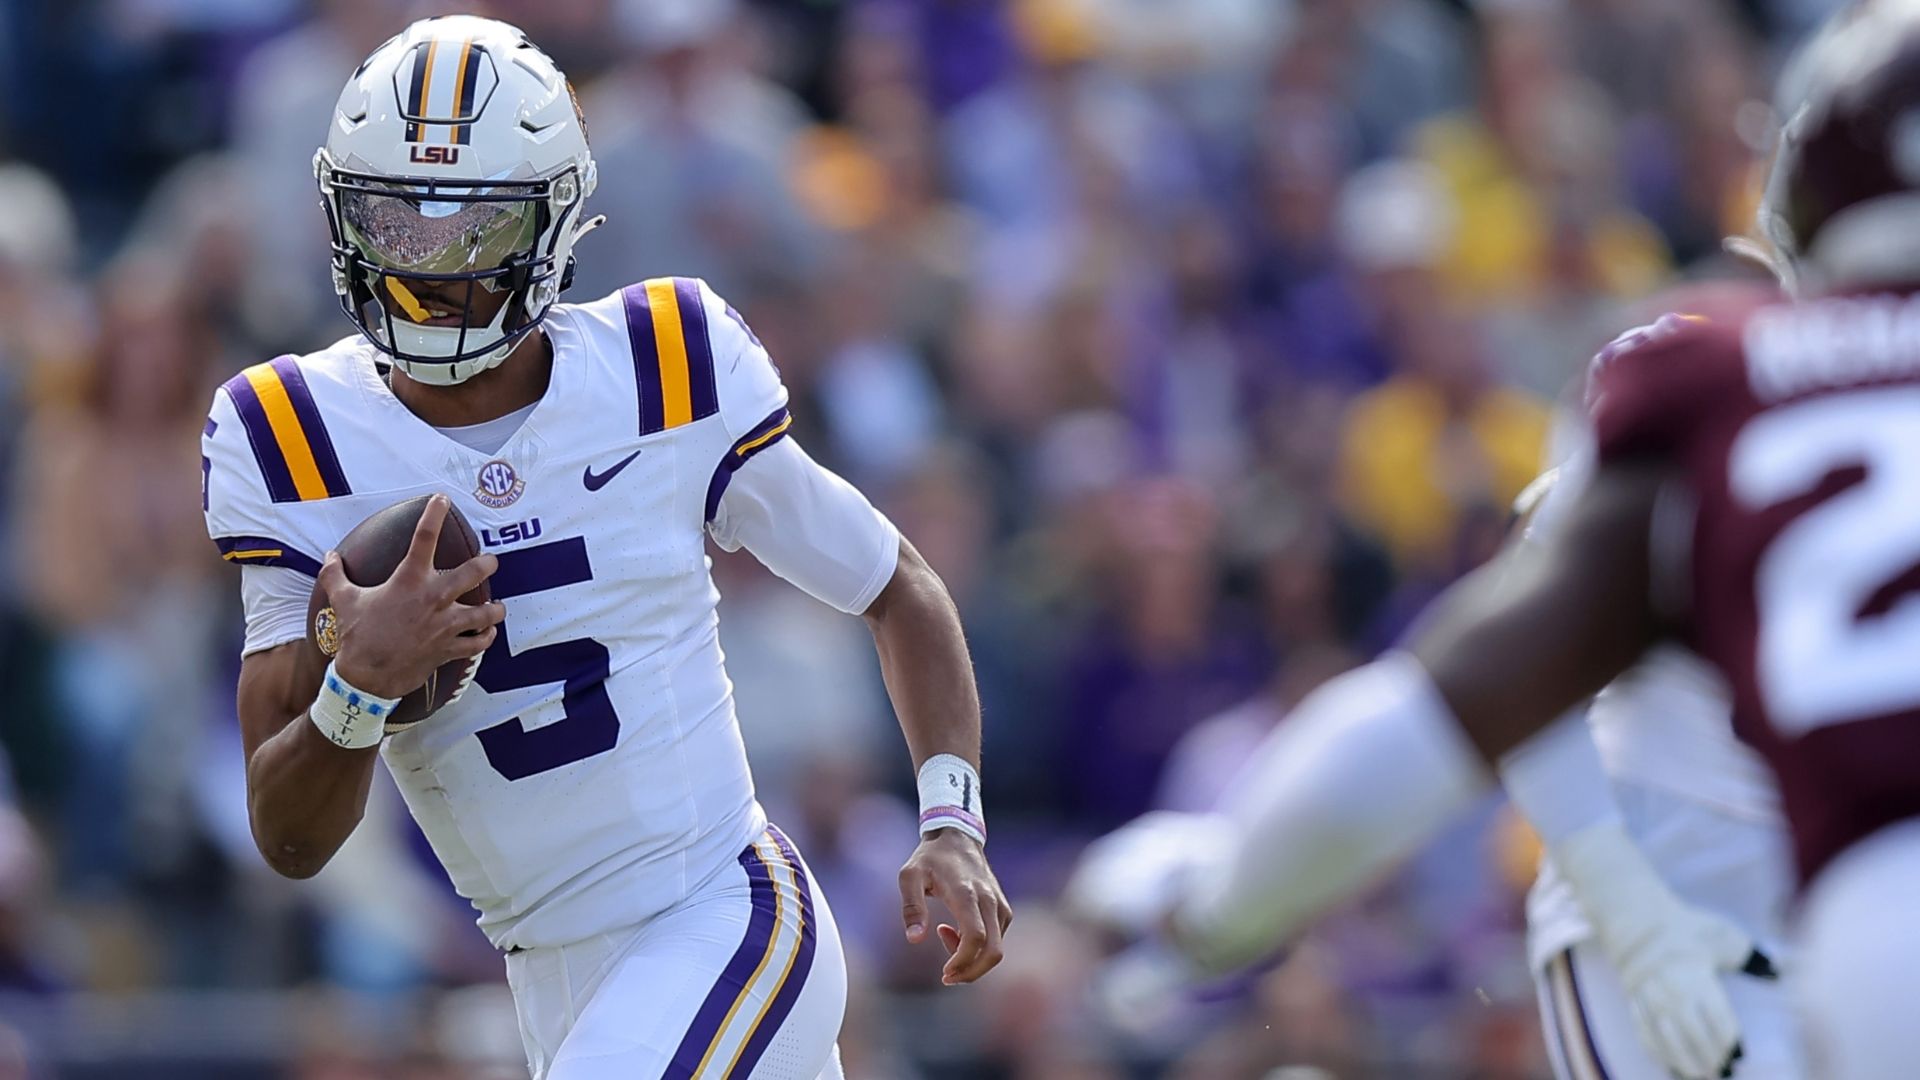 Daniels adds to Heisman resume with LSU win over Aggies